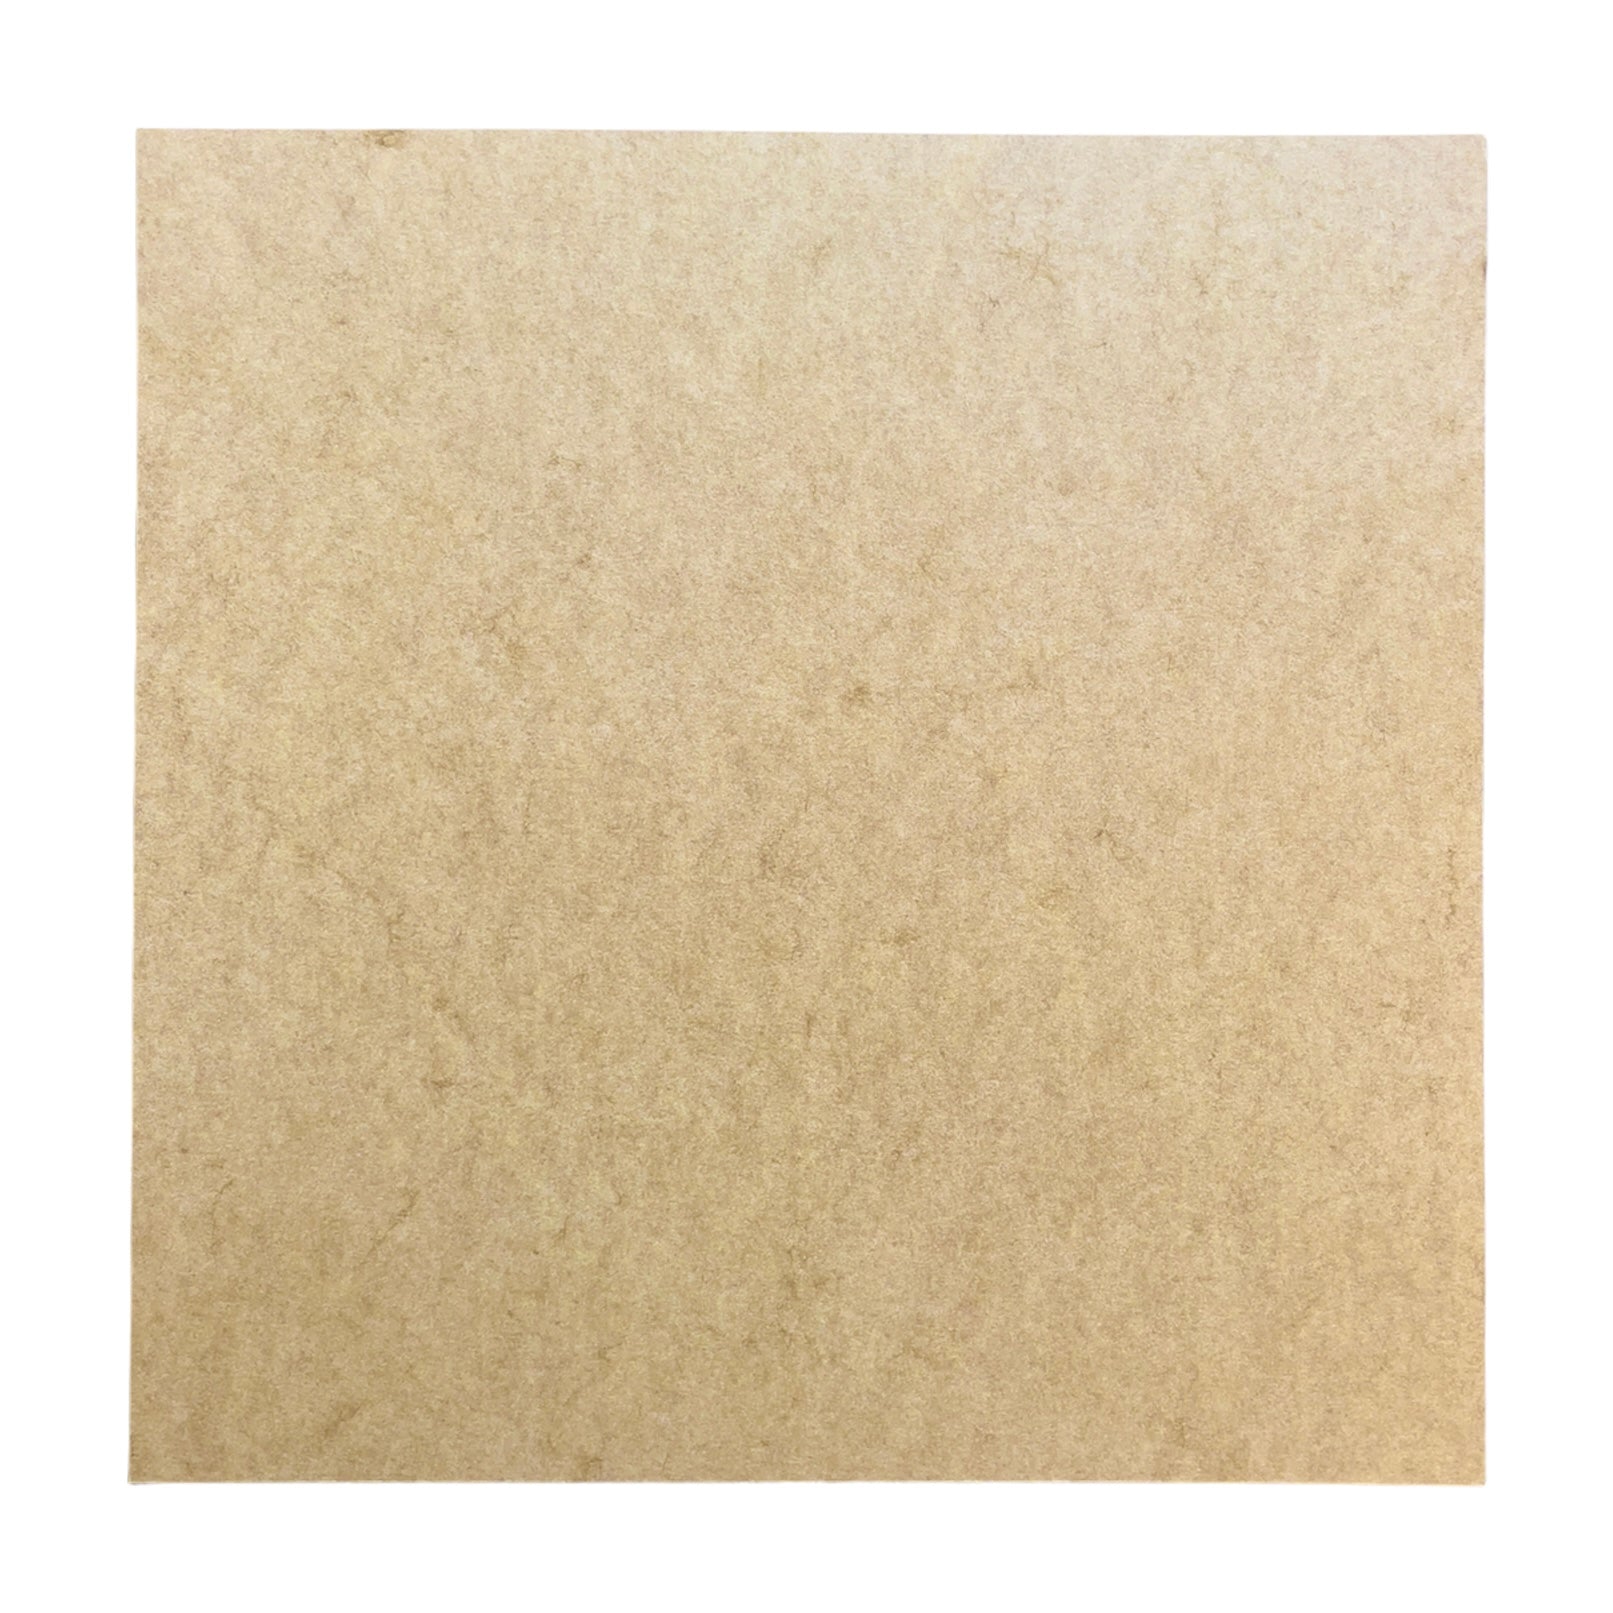 The Paper Company - Matte Marble - Mustard 12 x 12"